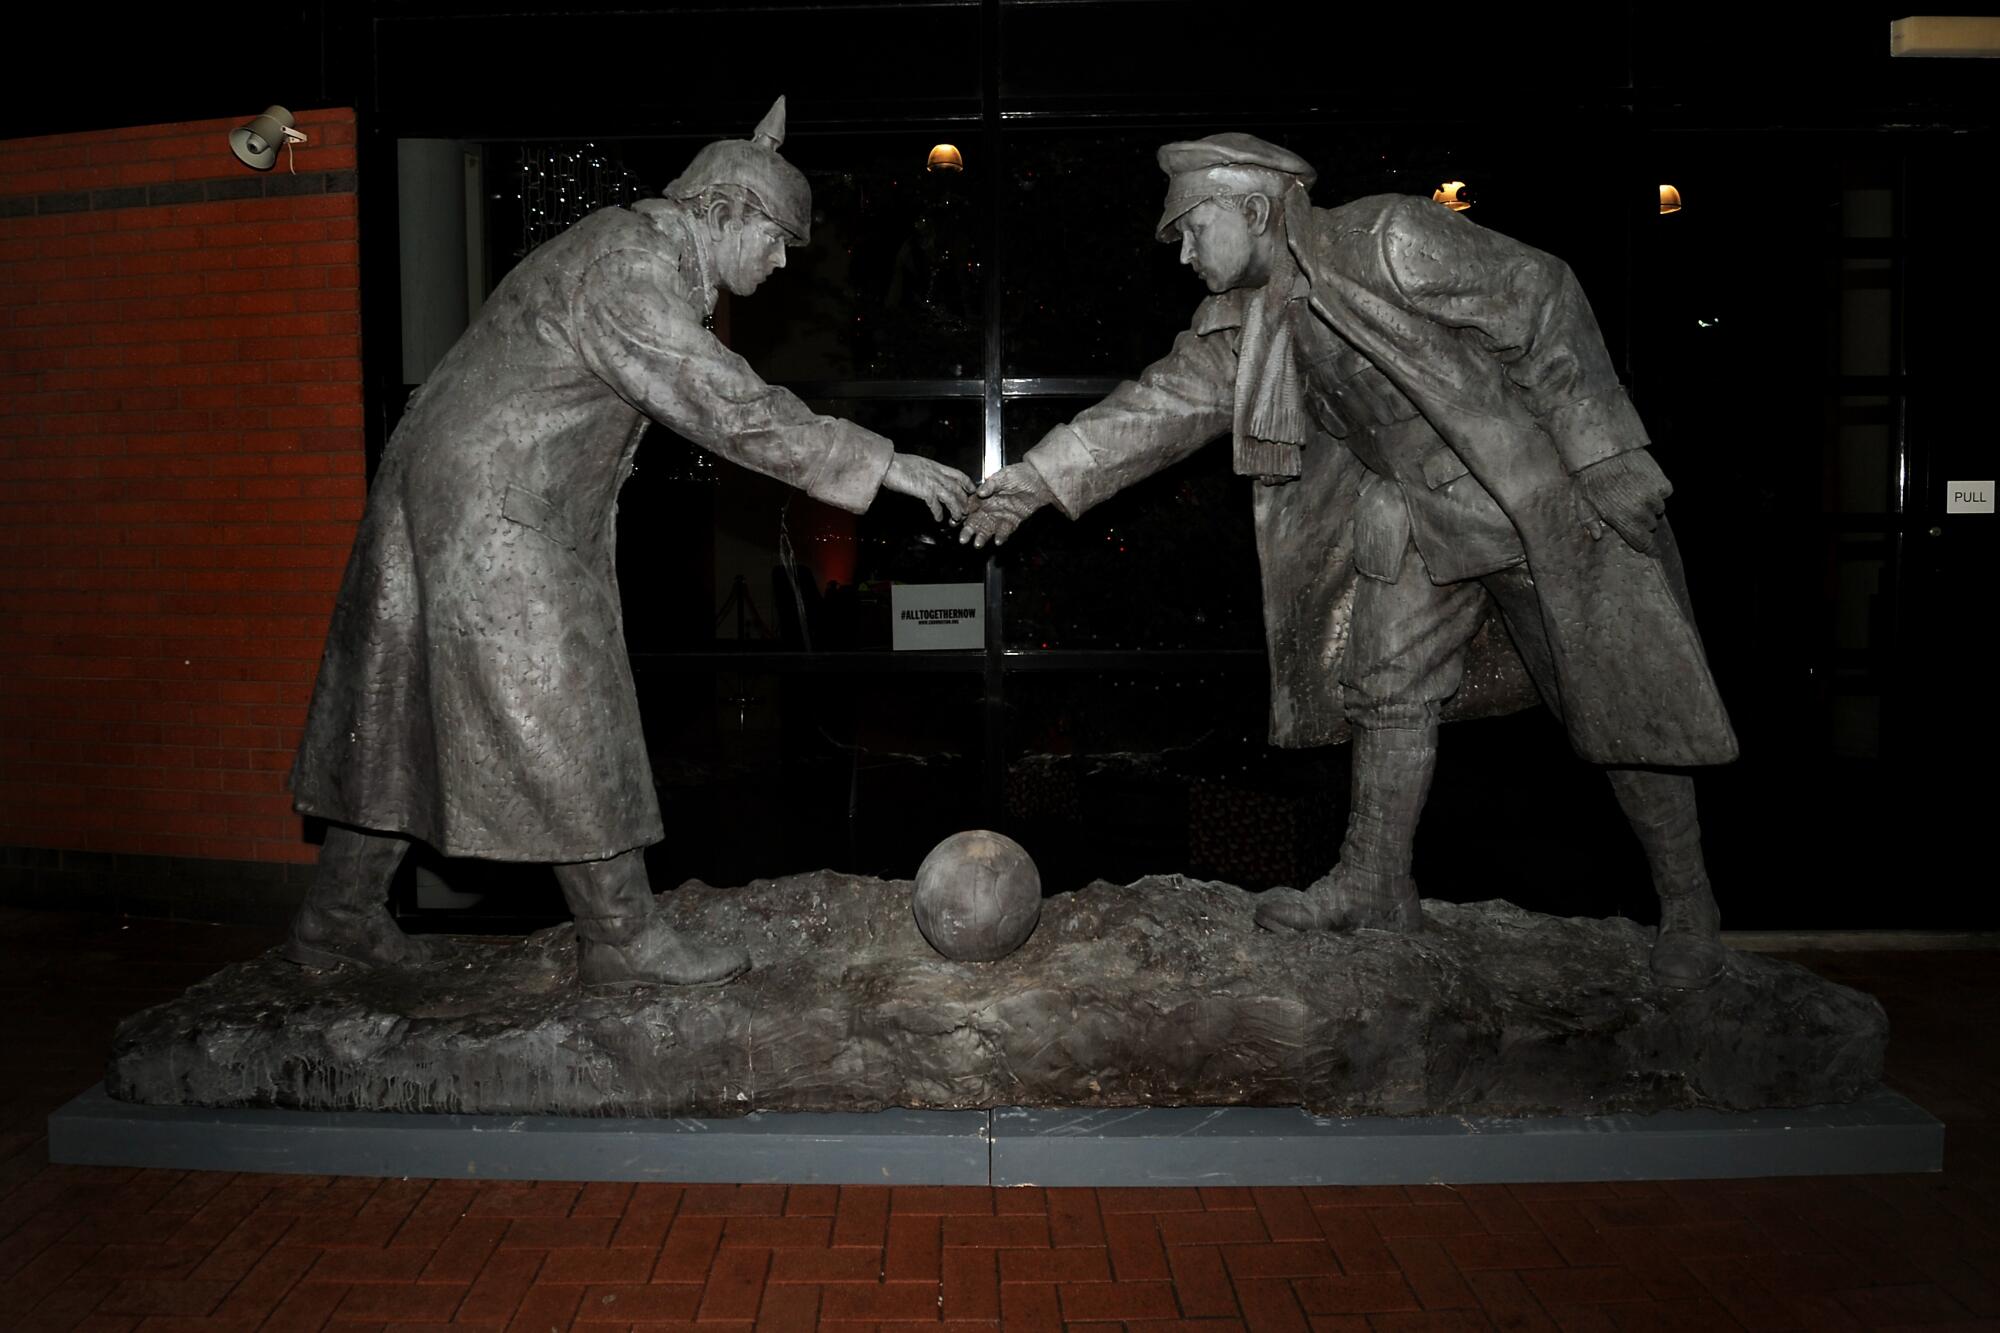 A World War I sculpture shows two soldiers, one British and the other German, greeting each other next to a soccer ball